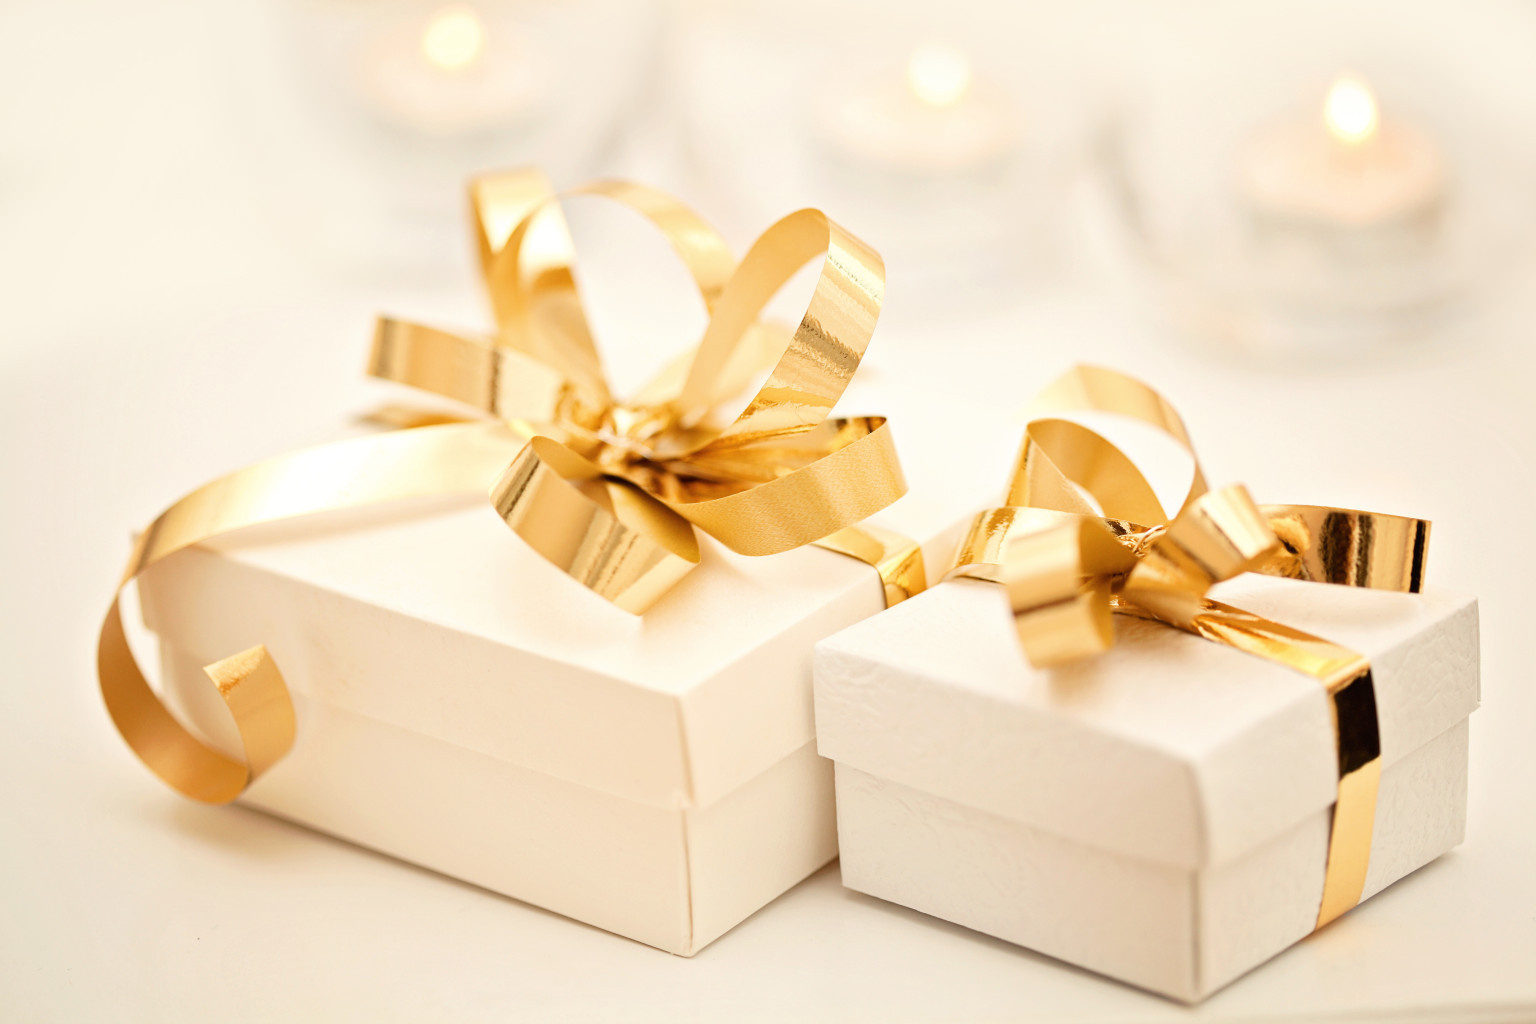 Gift Ideas For A Wedding
 Wedding Gift Gone Awry Prompts Crazy Etiquette War Between